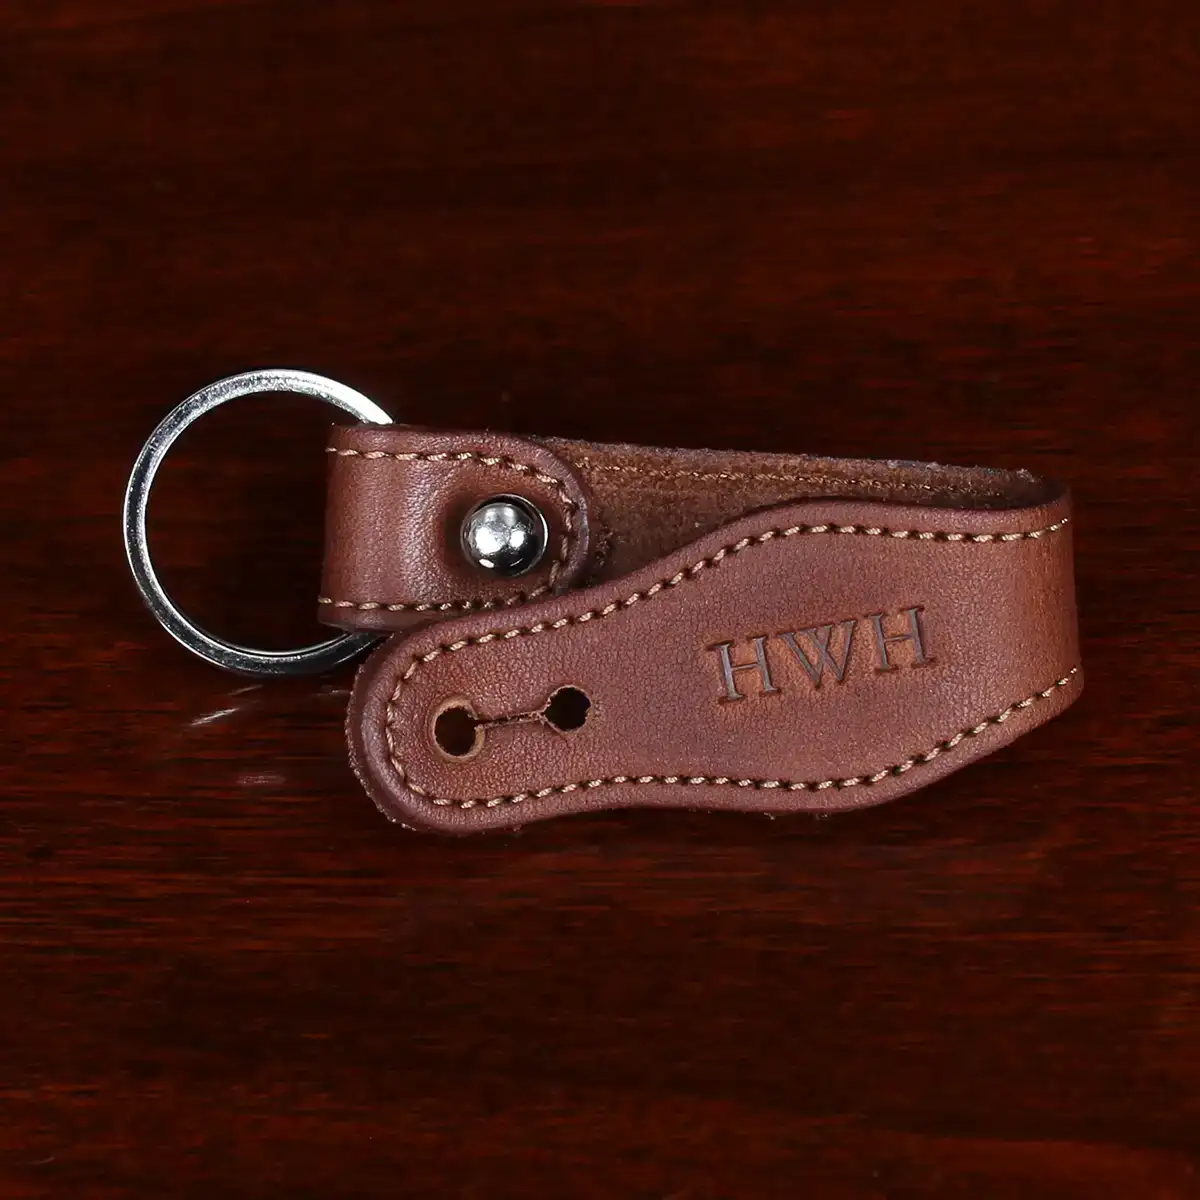 Colonel Littleton Full-Grain, Steerhide Leather No. 6 Key Ring - Brown - Nickel Finished Ball Stud Closure - Monogrammed - Handmade in USA by Col. Littleton